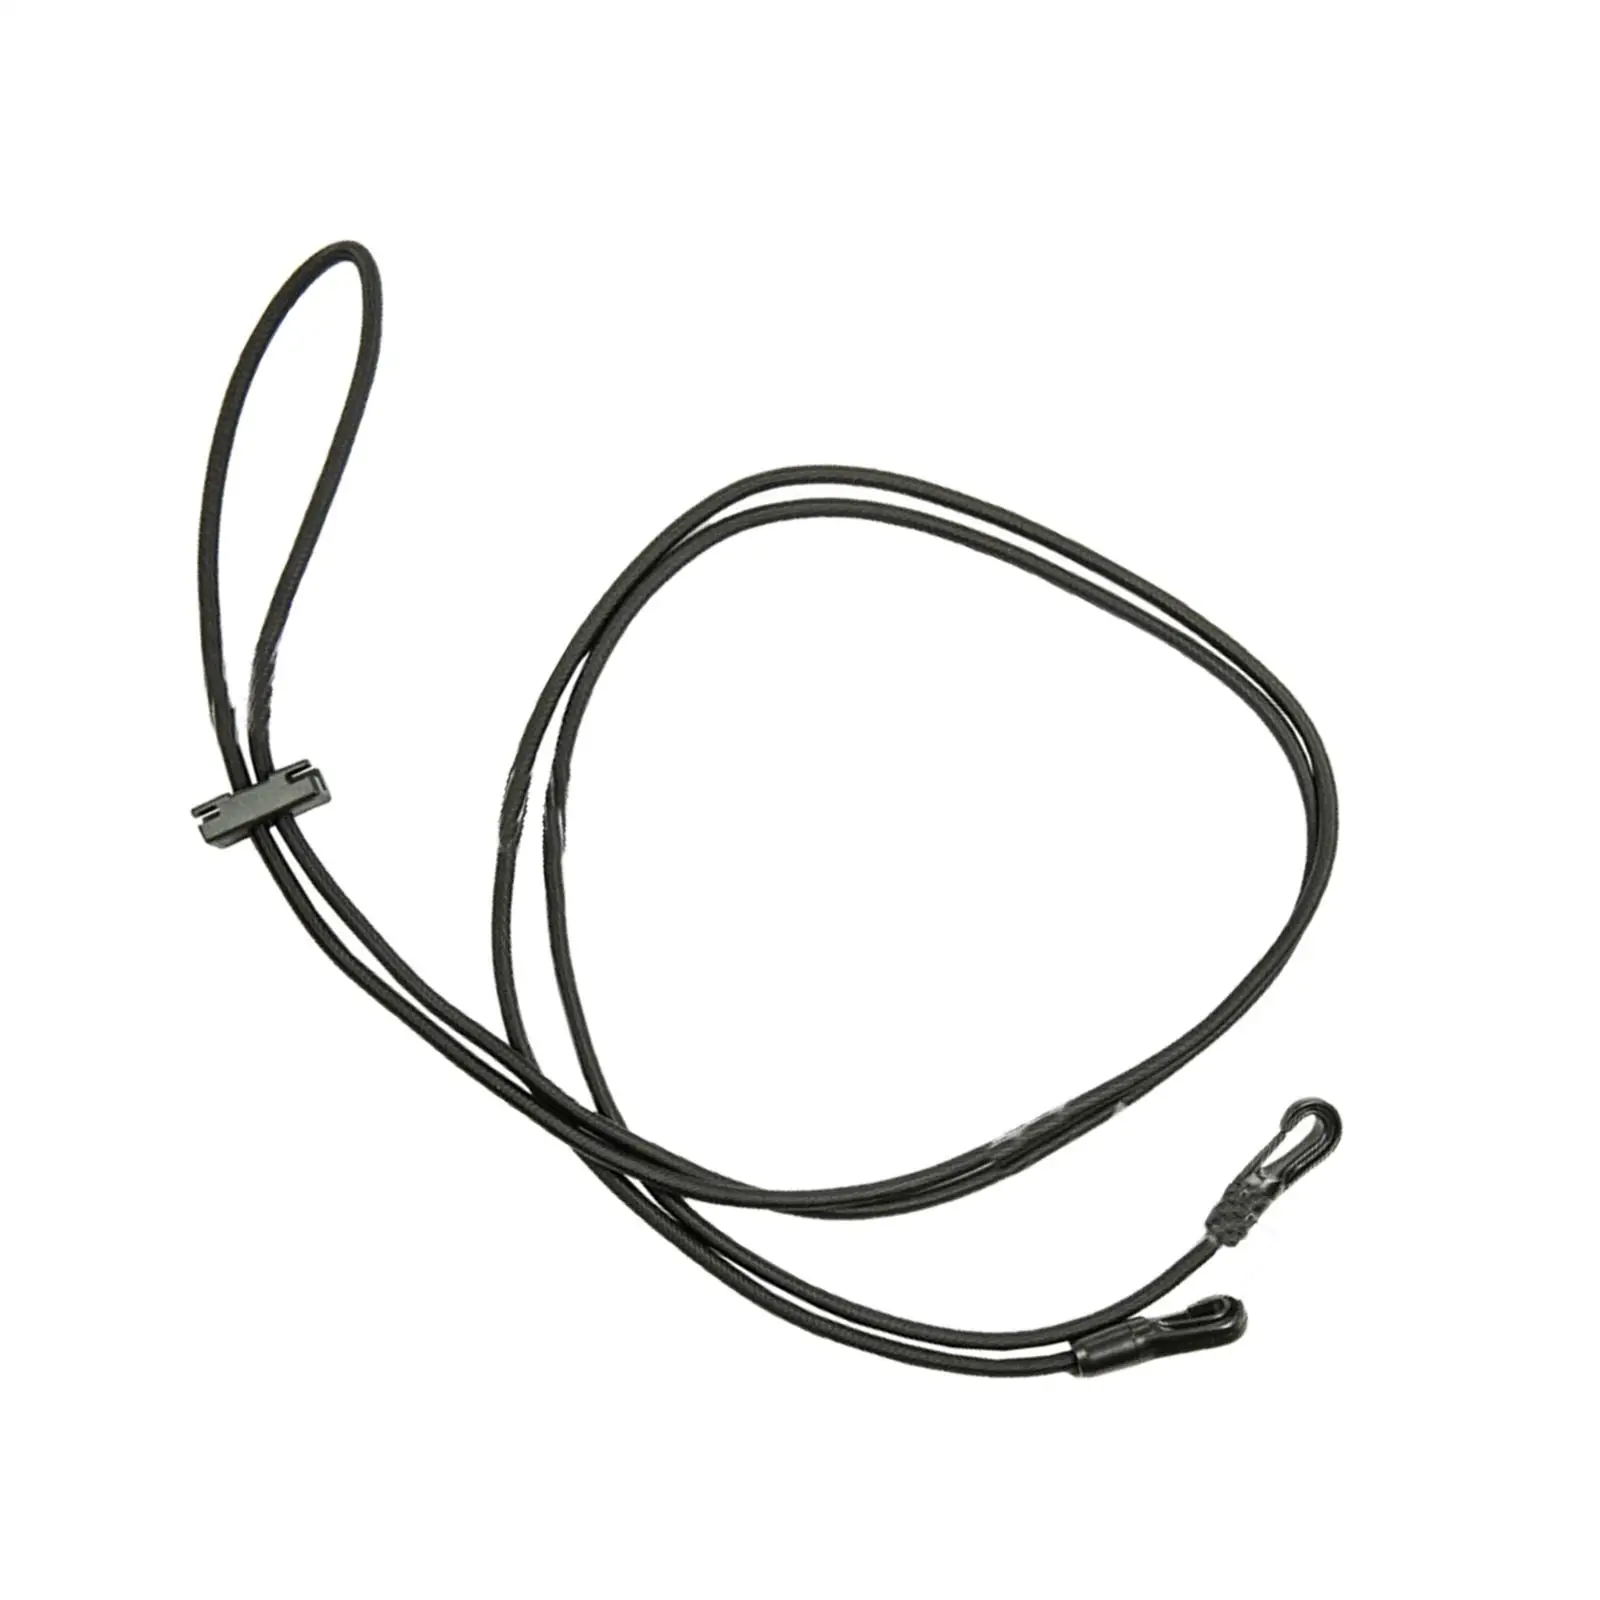 Horse Rein Rope Comfortable Adjustable for Hunting Training Aid